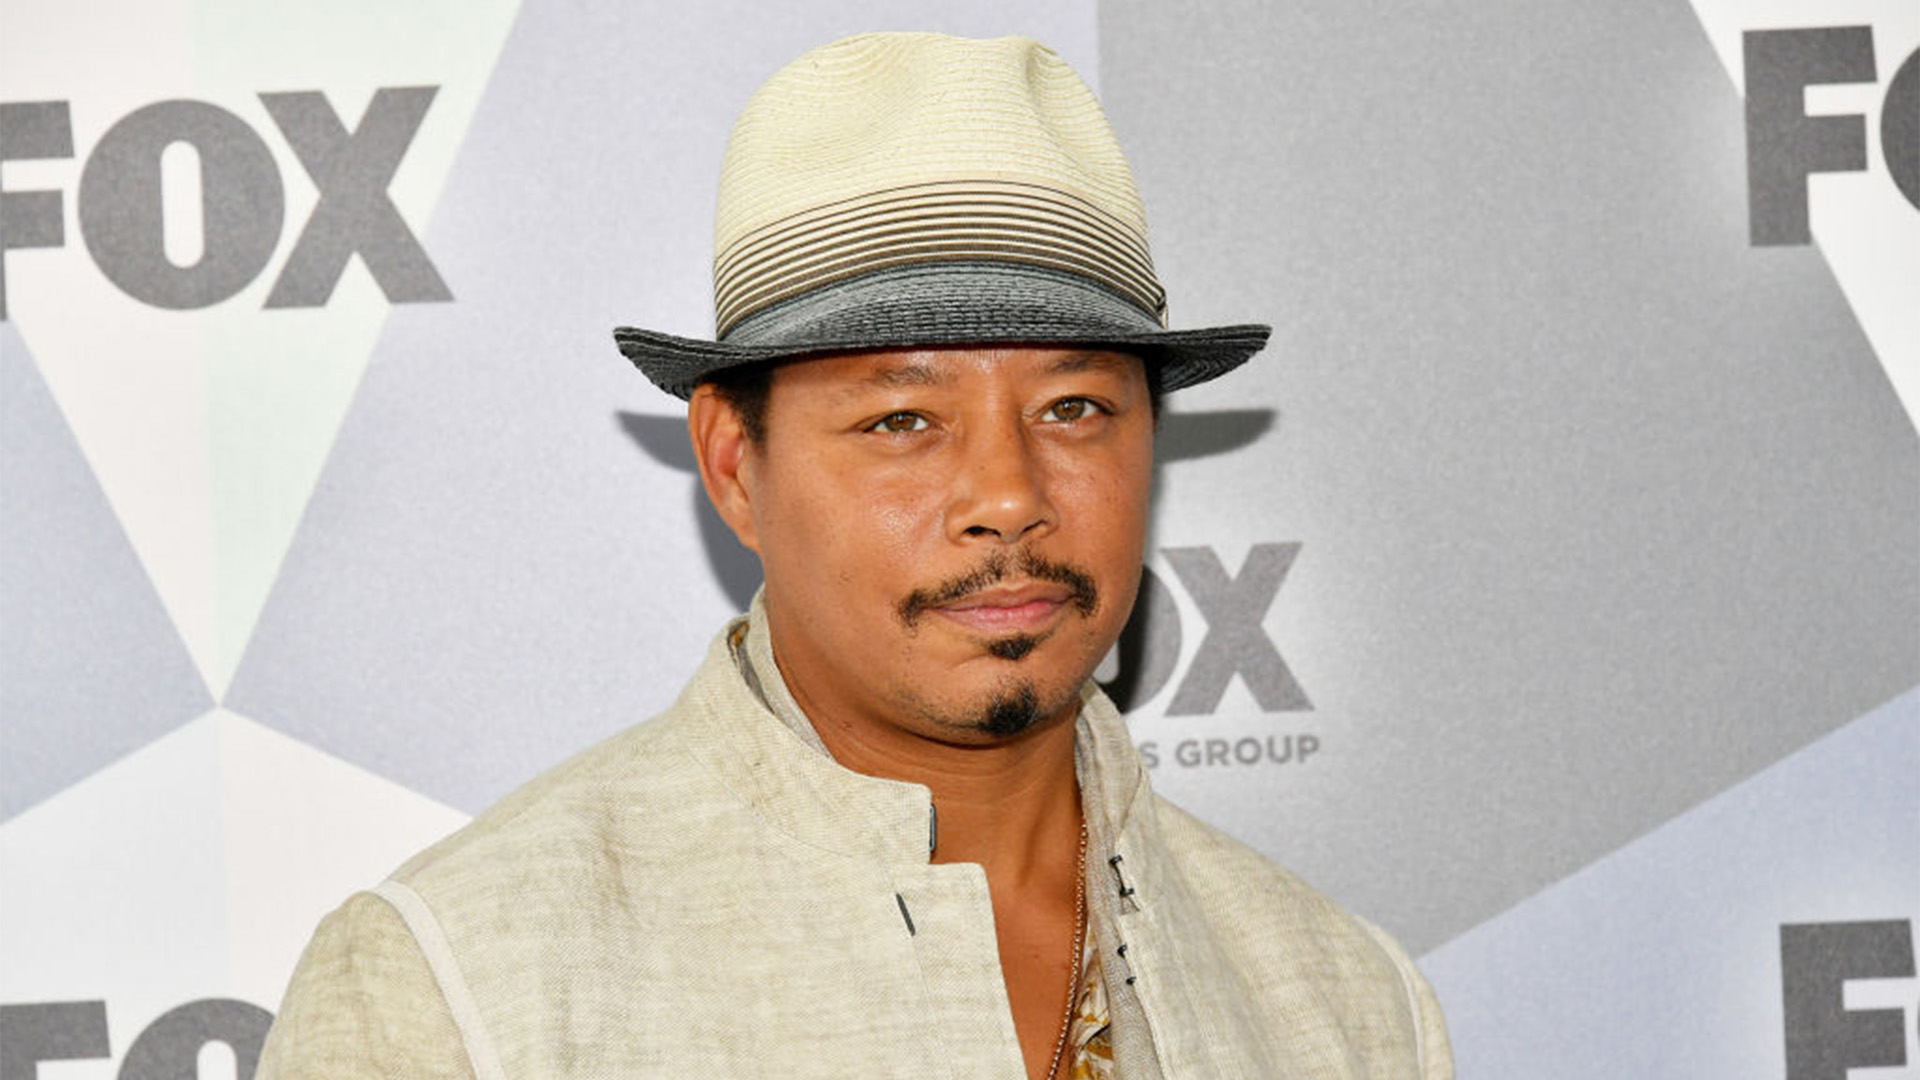 Terrence Howard Claims He's Owed $120M From The CAA 'Based On What Would've Been Paid To White Counterparts'